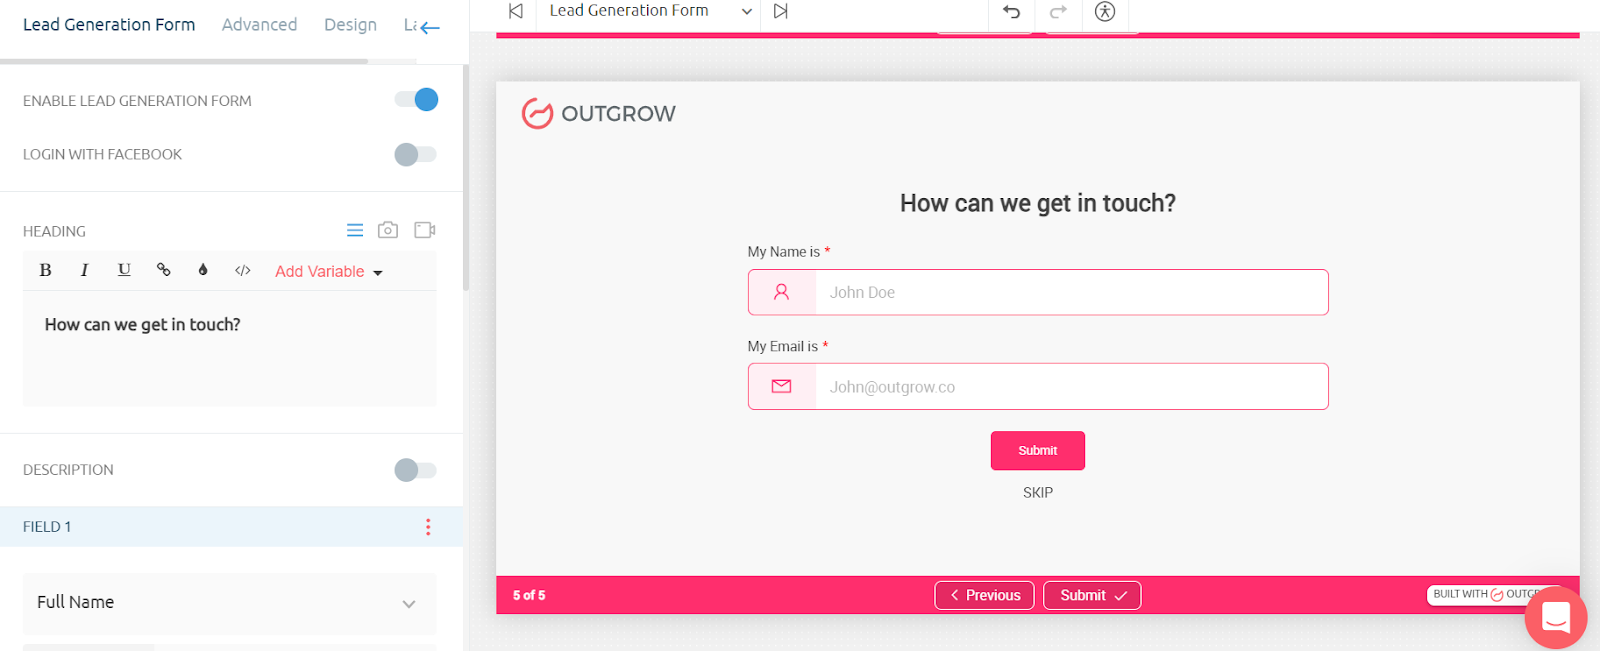 Outgrow's lead generation form